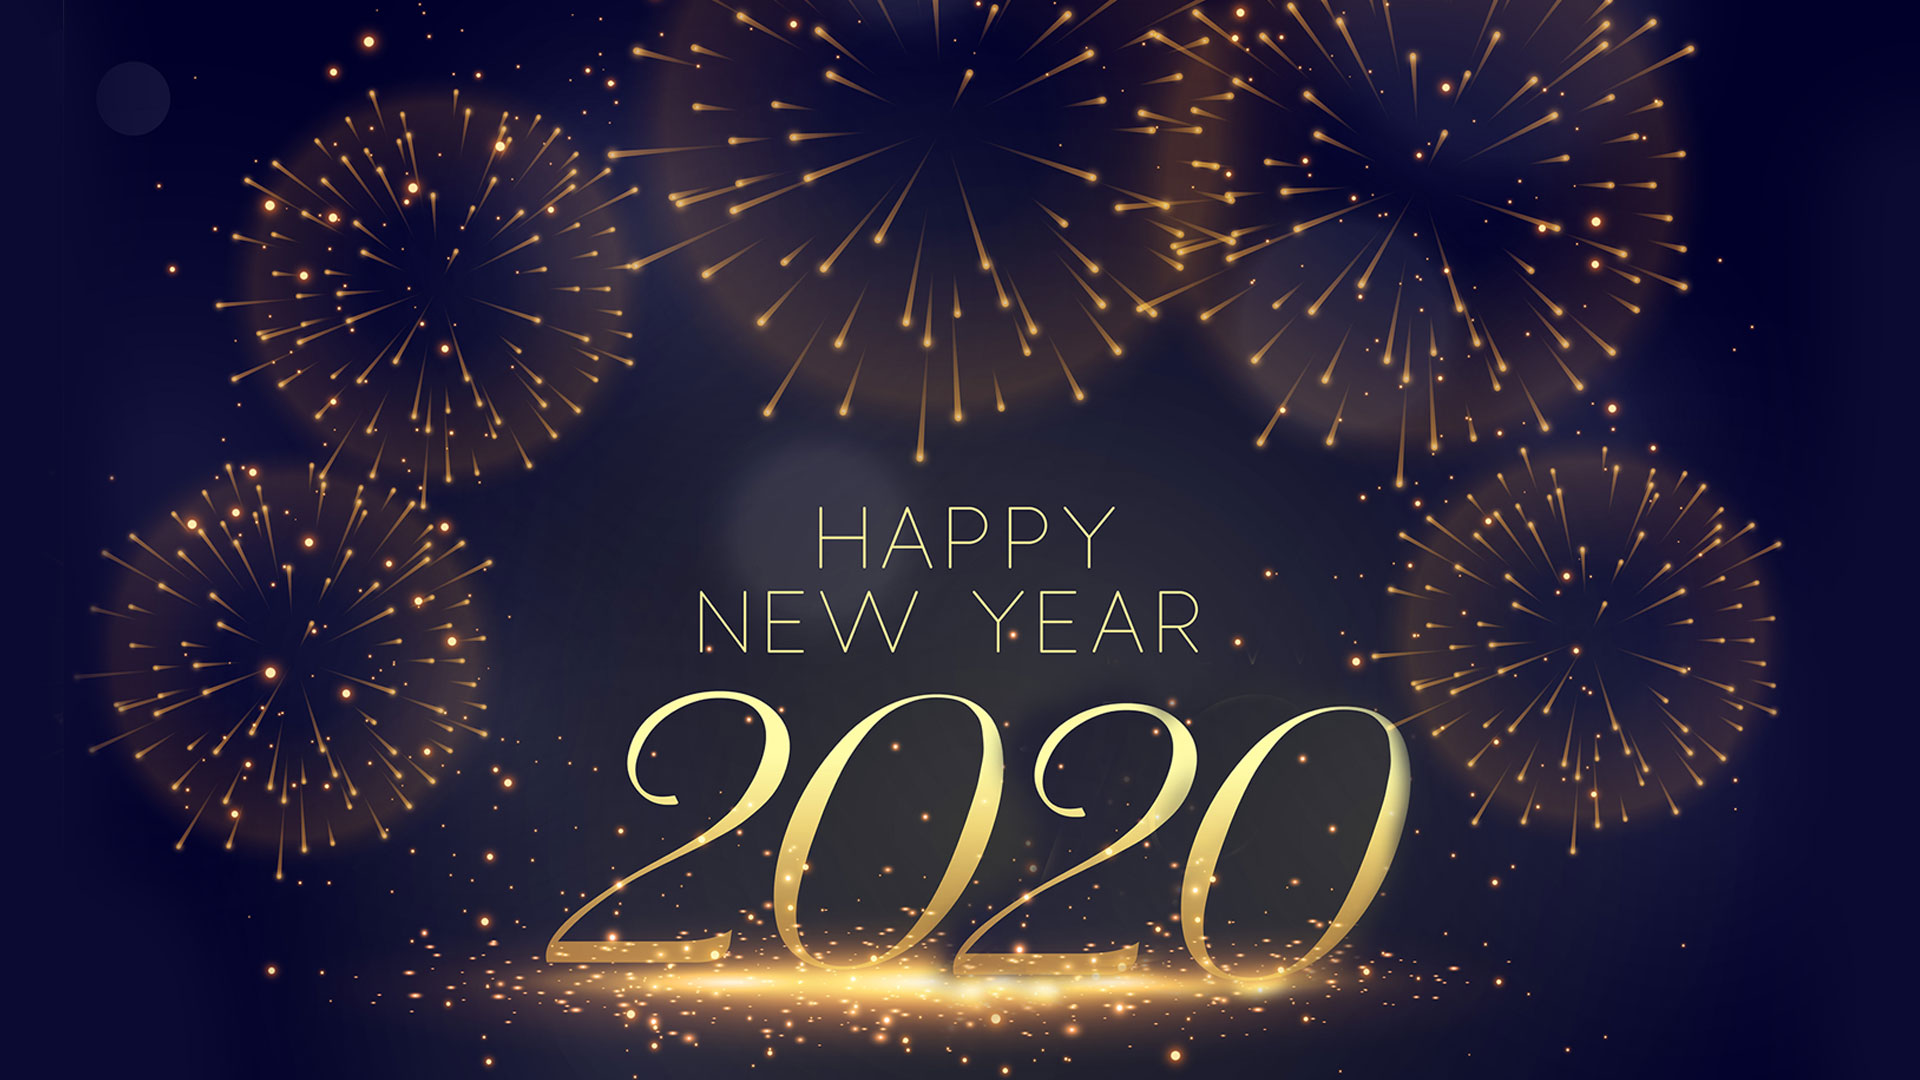 2020 Happy New Year HD Wallpapers Images Free Download   Techicy